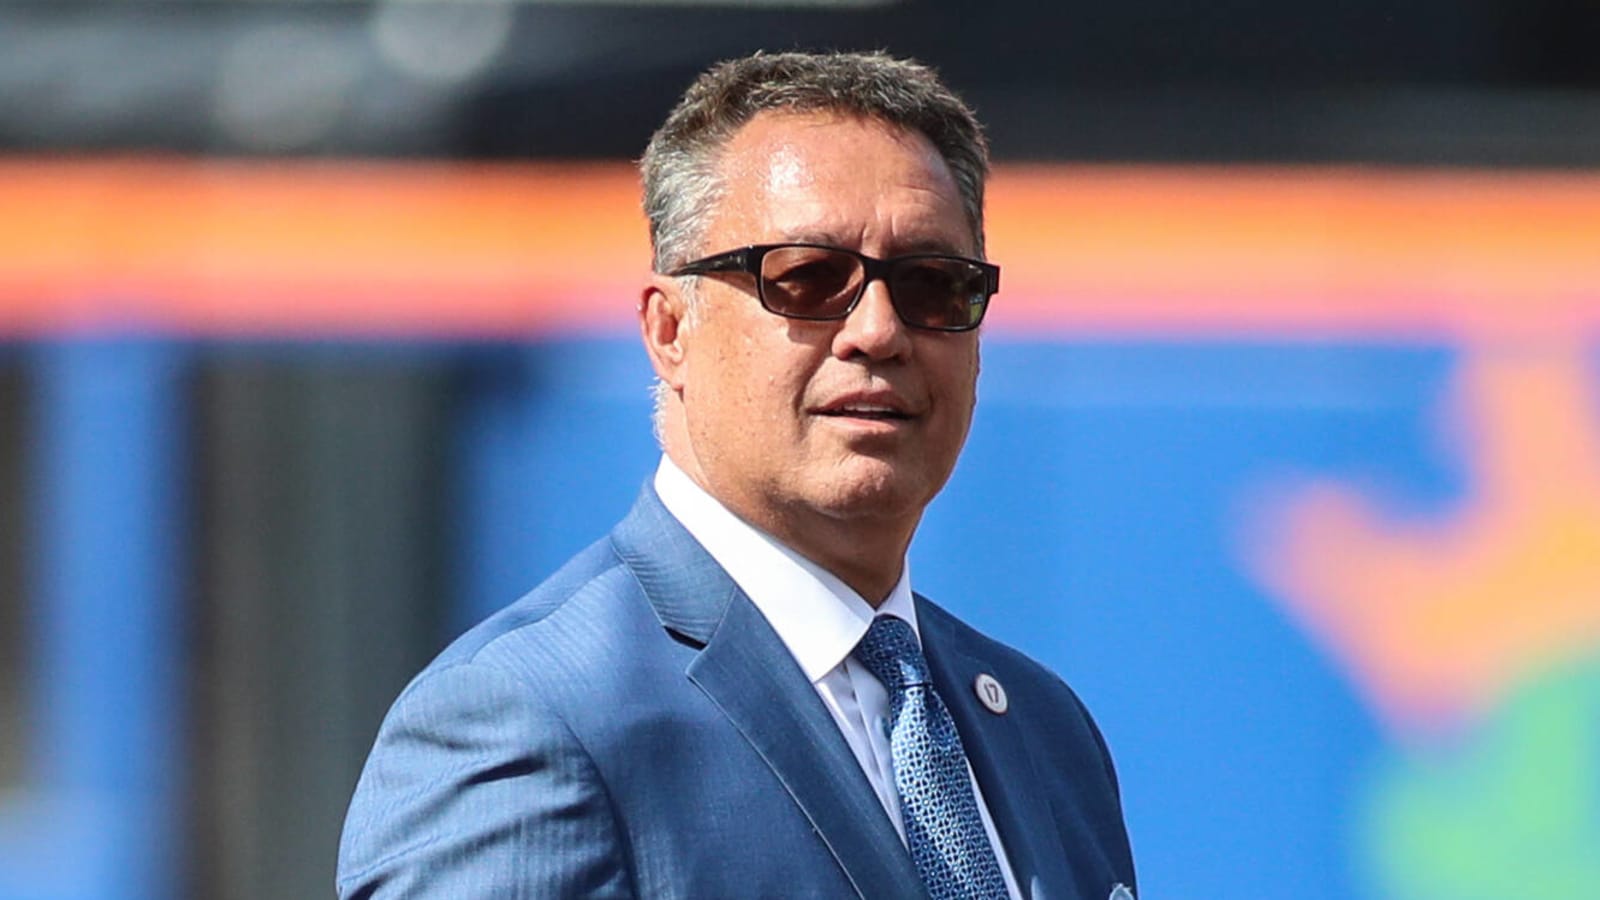 Ron Darling: 'Payment is due' for Mets players being hit by pitches